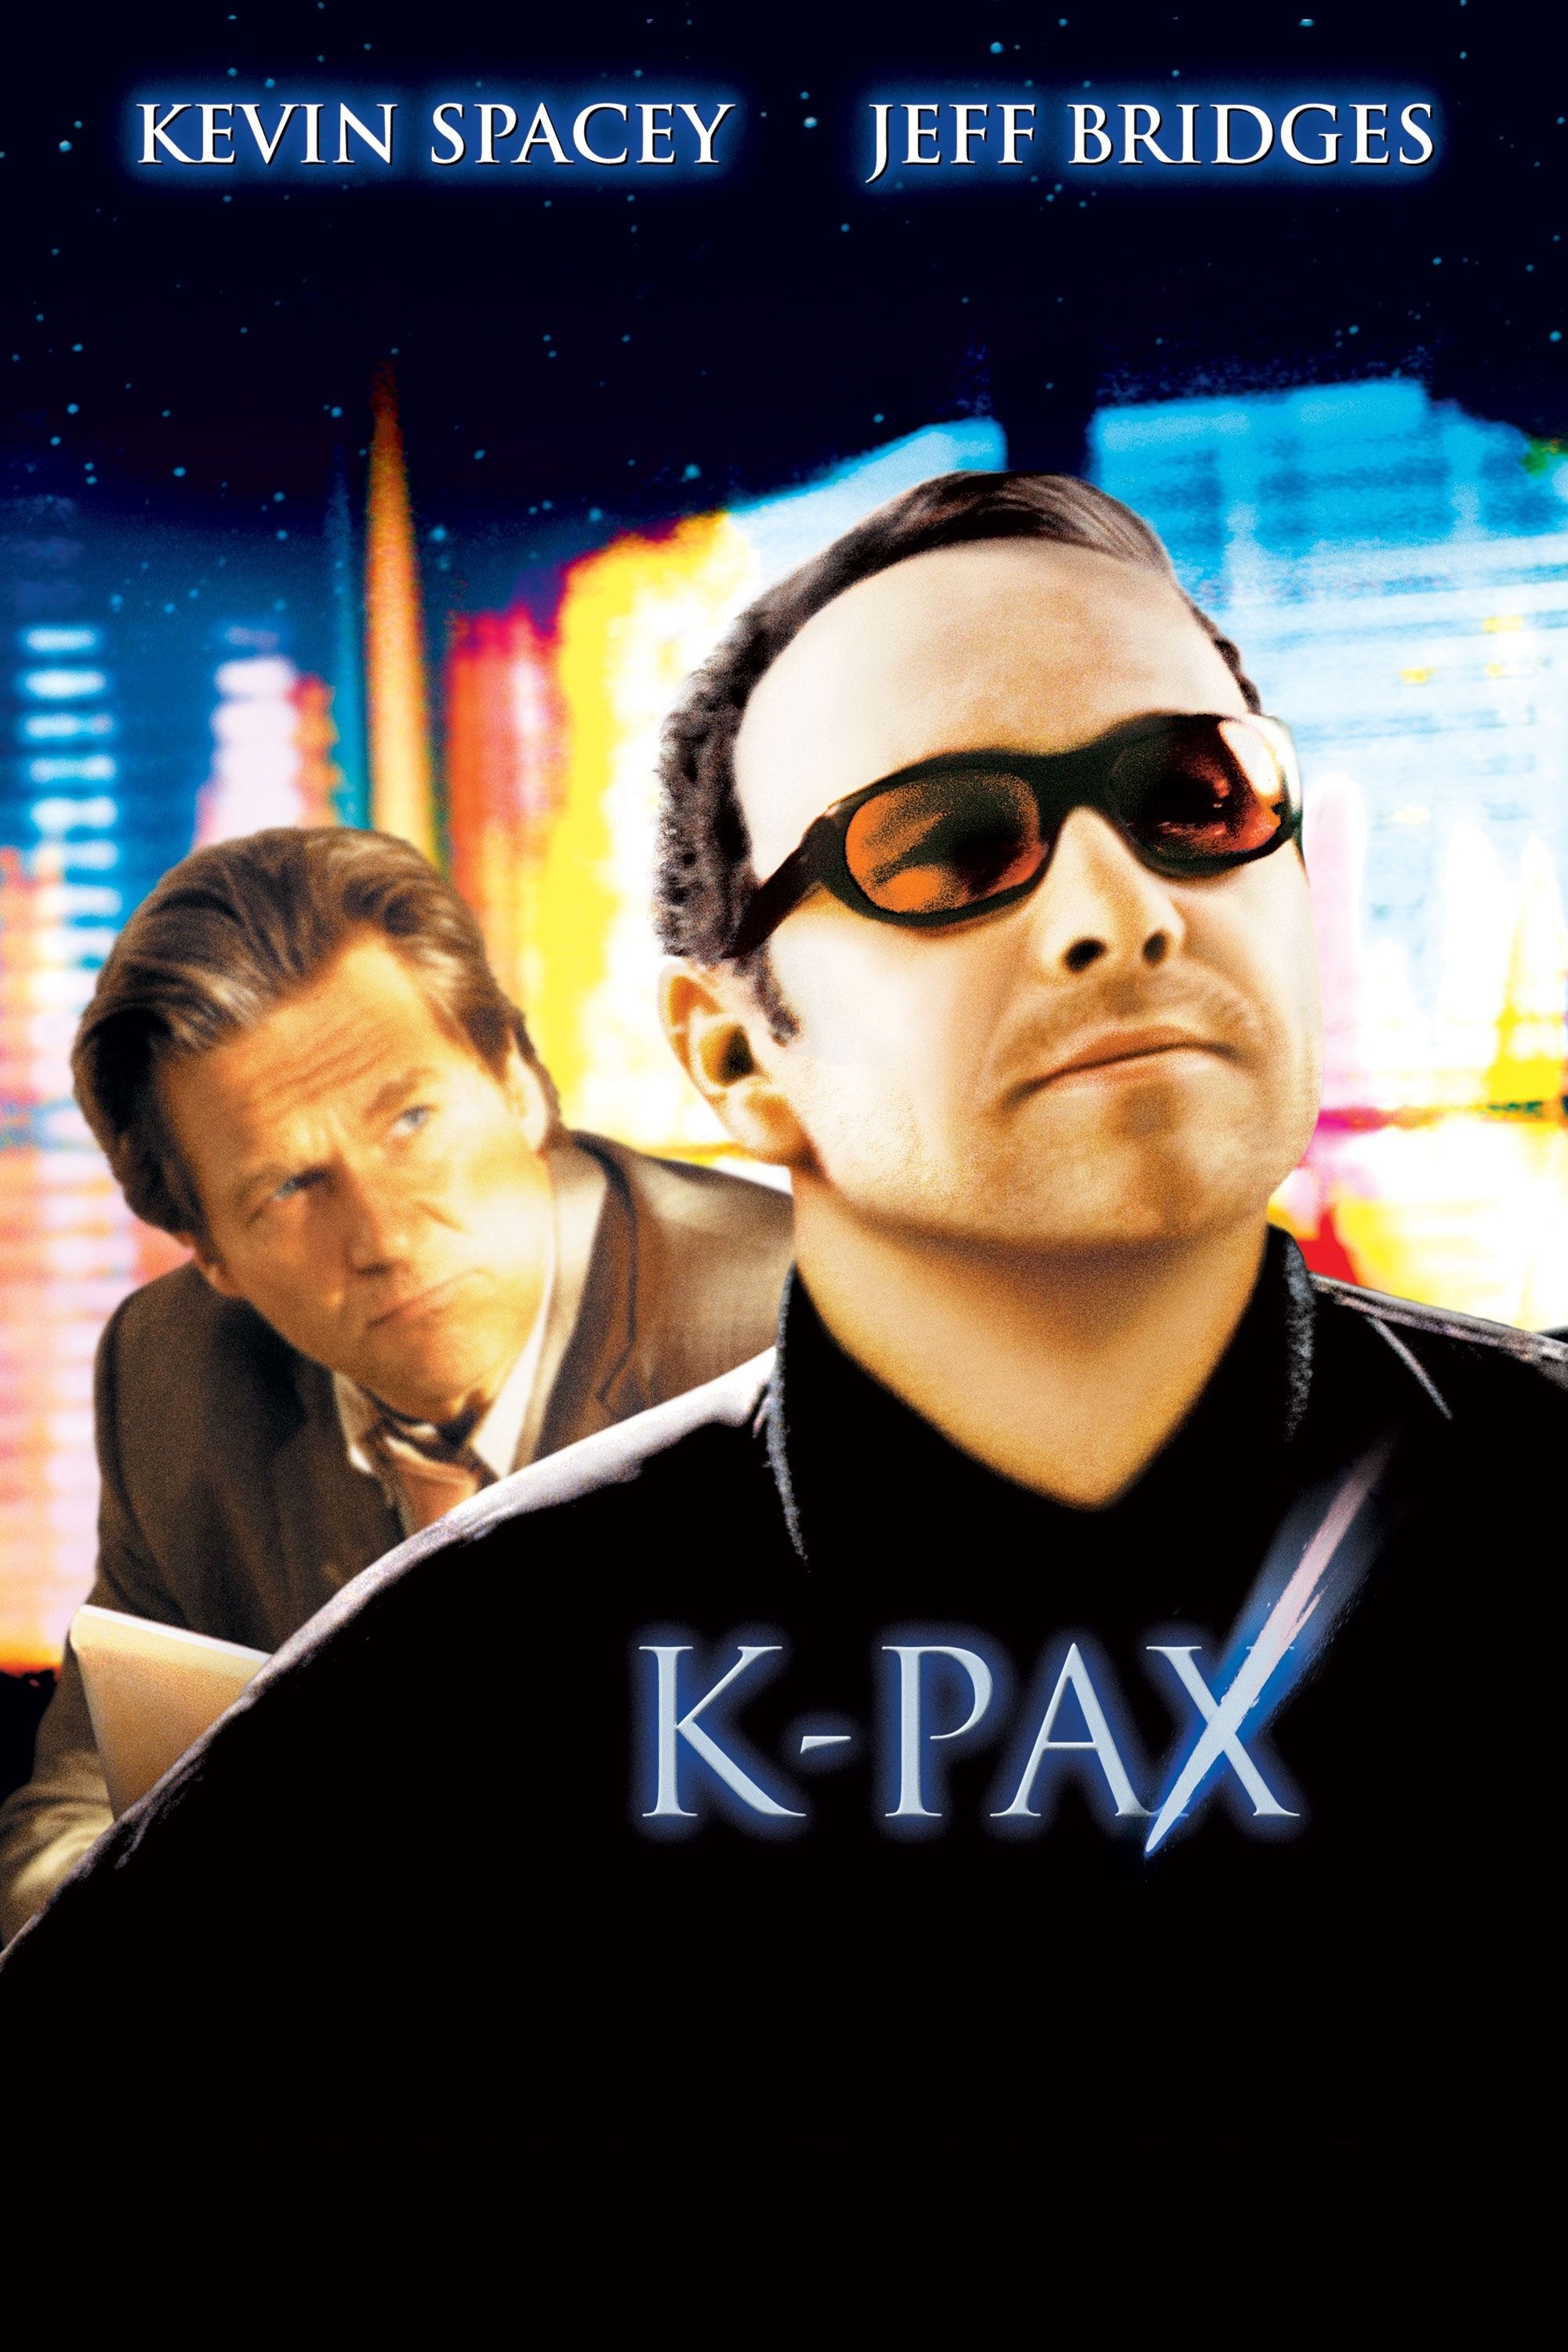 K-PAX movie streaming, Accessible anywhere, Intriguing sci-fi film, Notable performances, 2000x3000 HD Phone